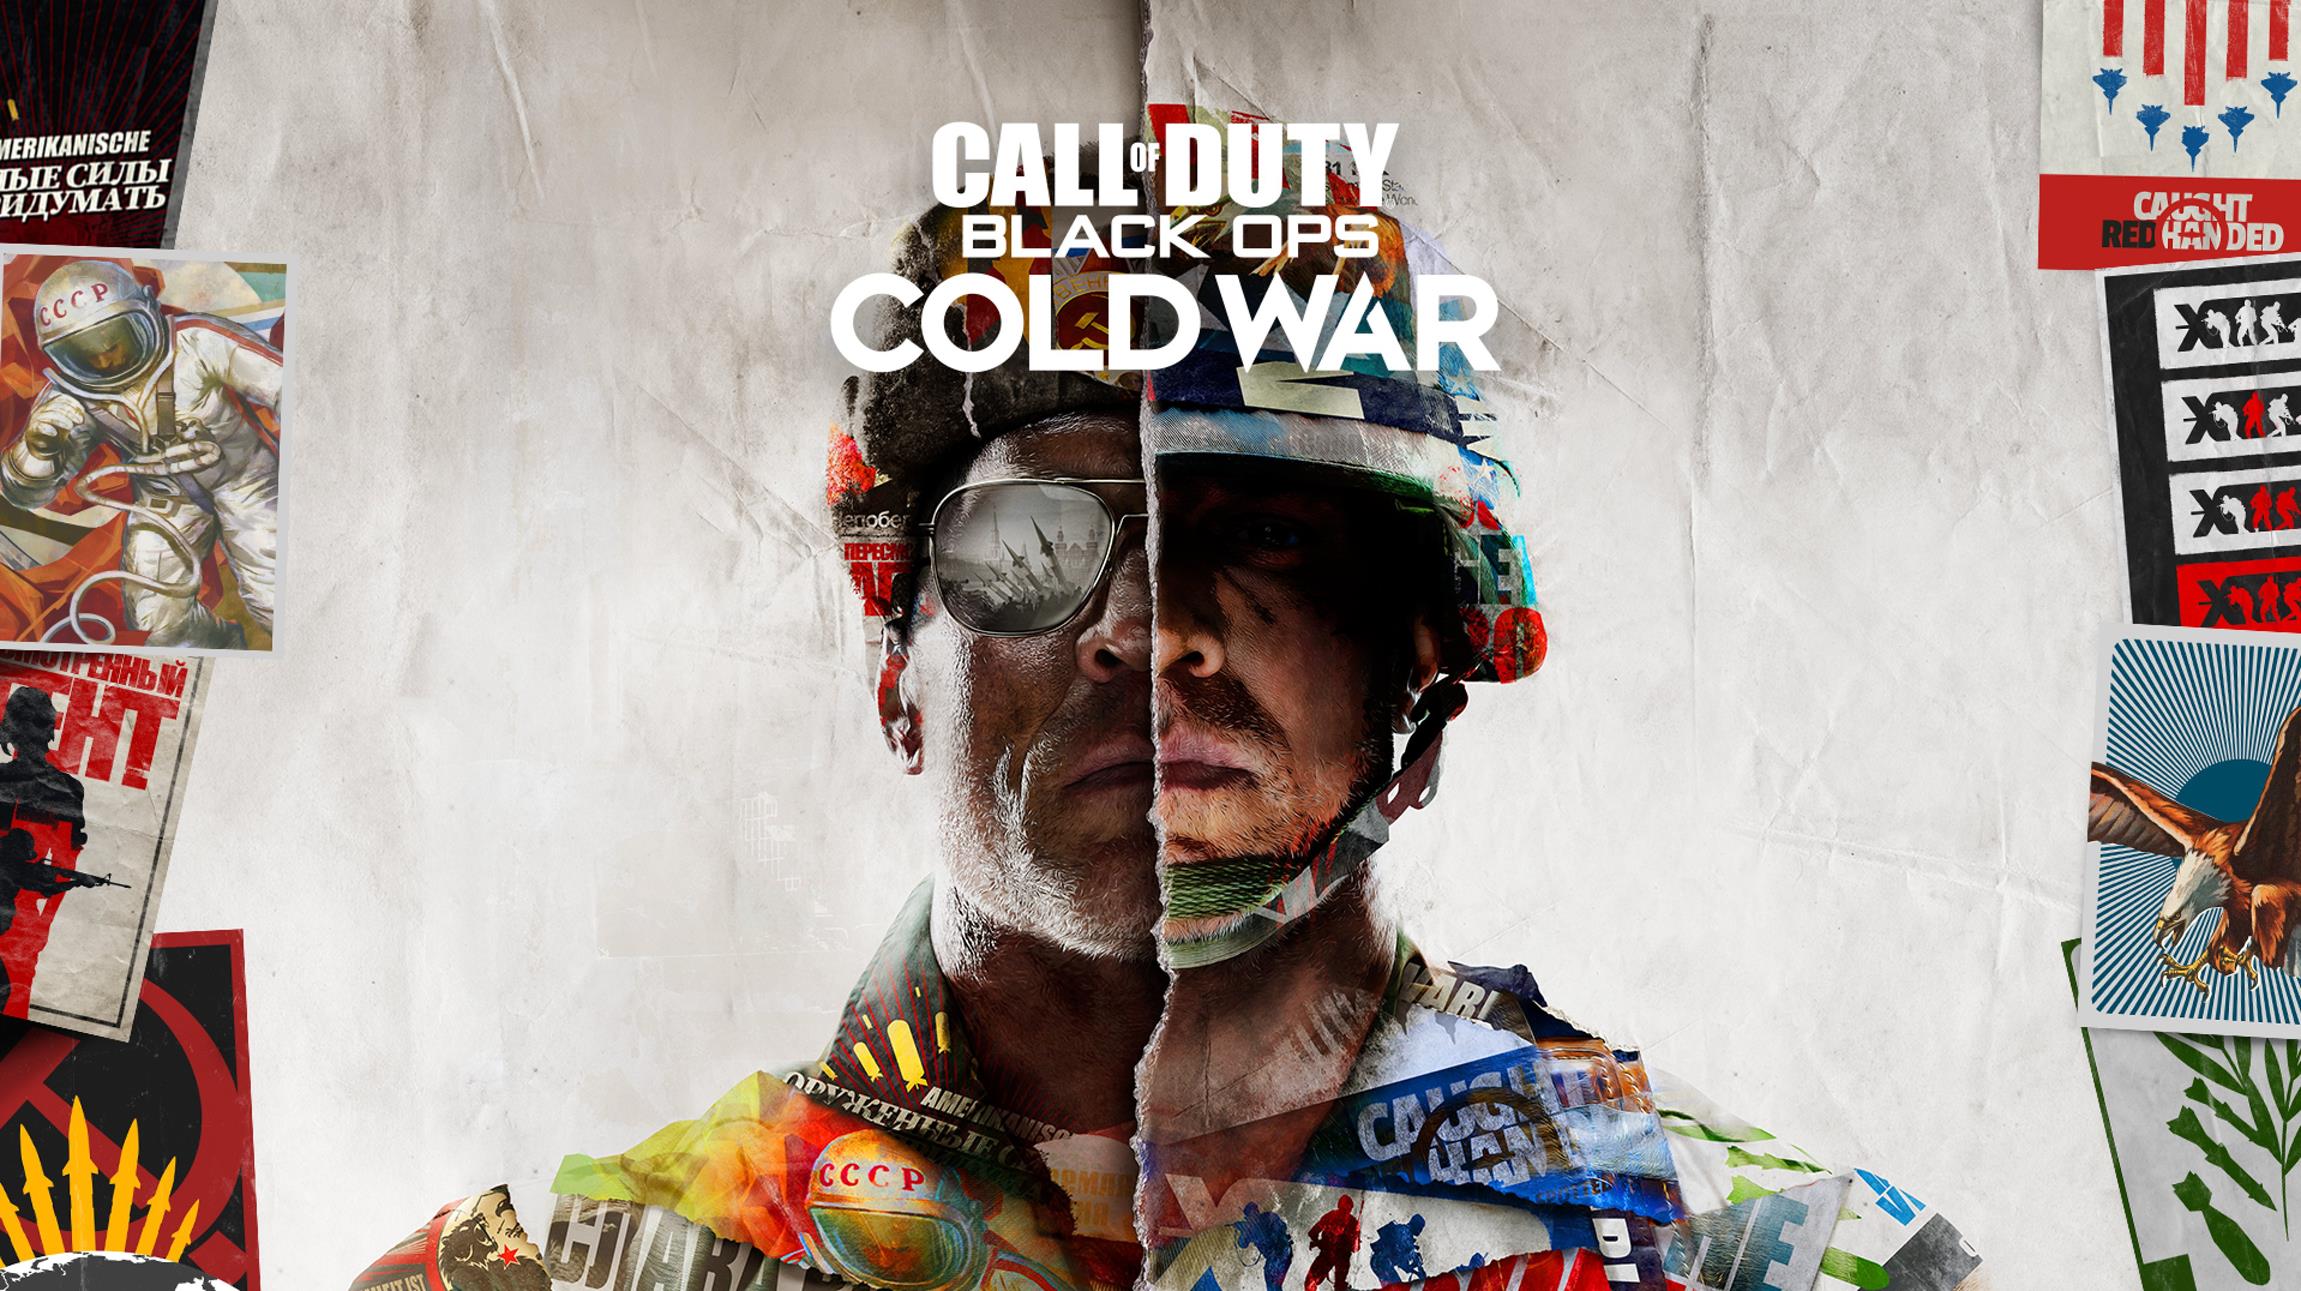 Image for Call of Duty: Black Ops Cold War release date, multiplayer reveal date reportedly leaked